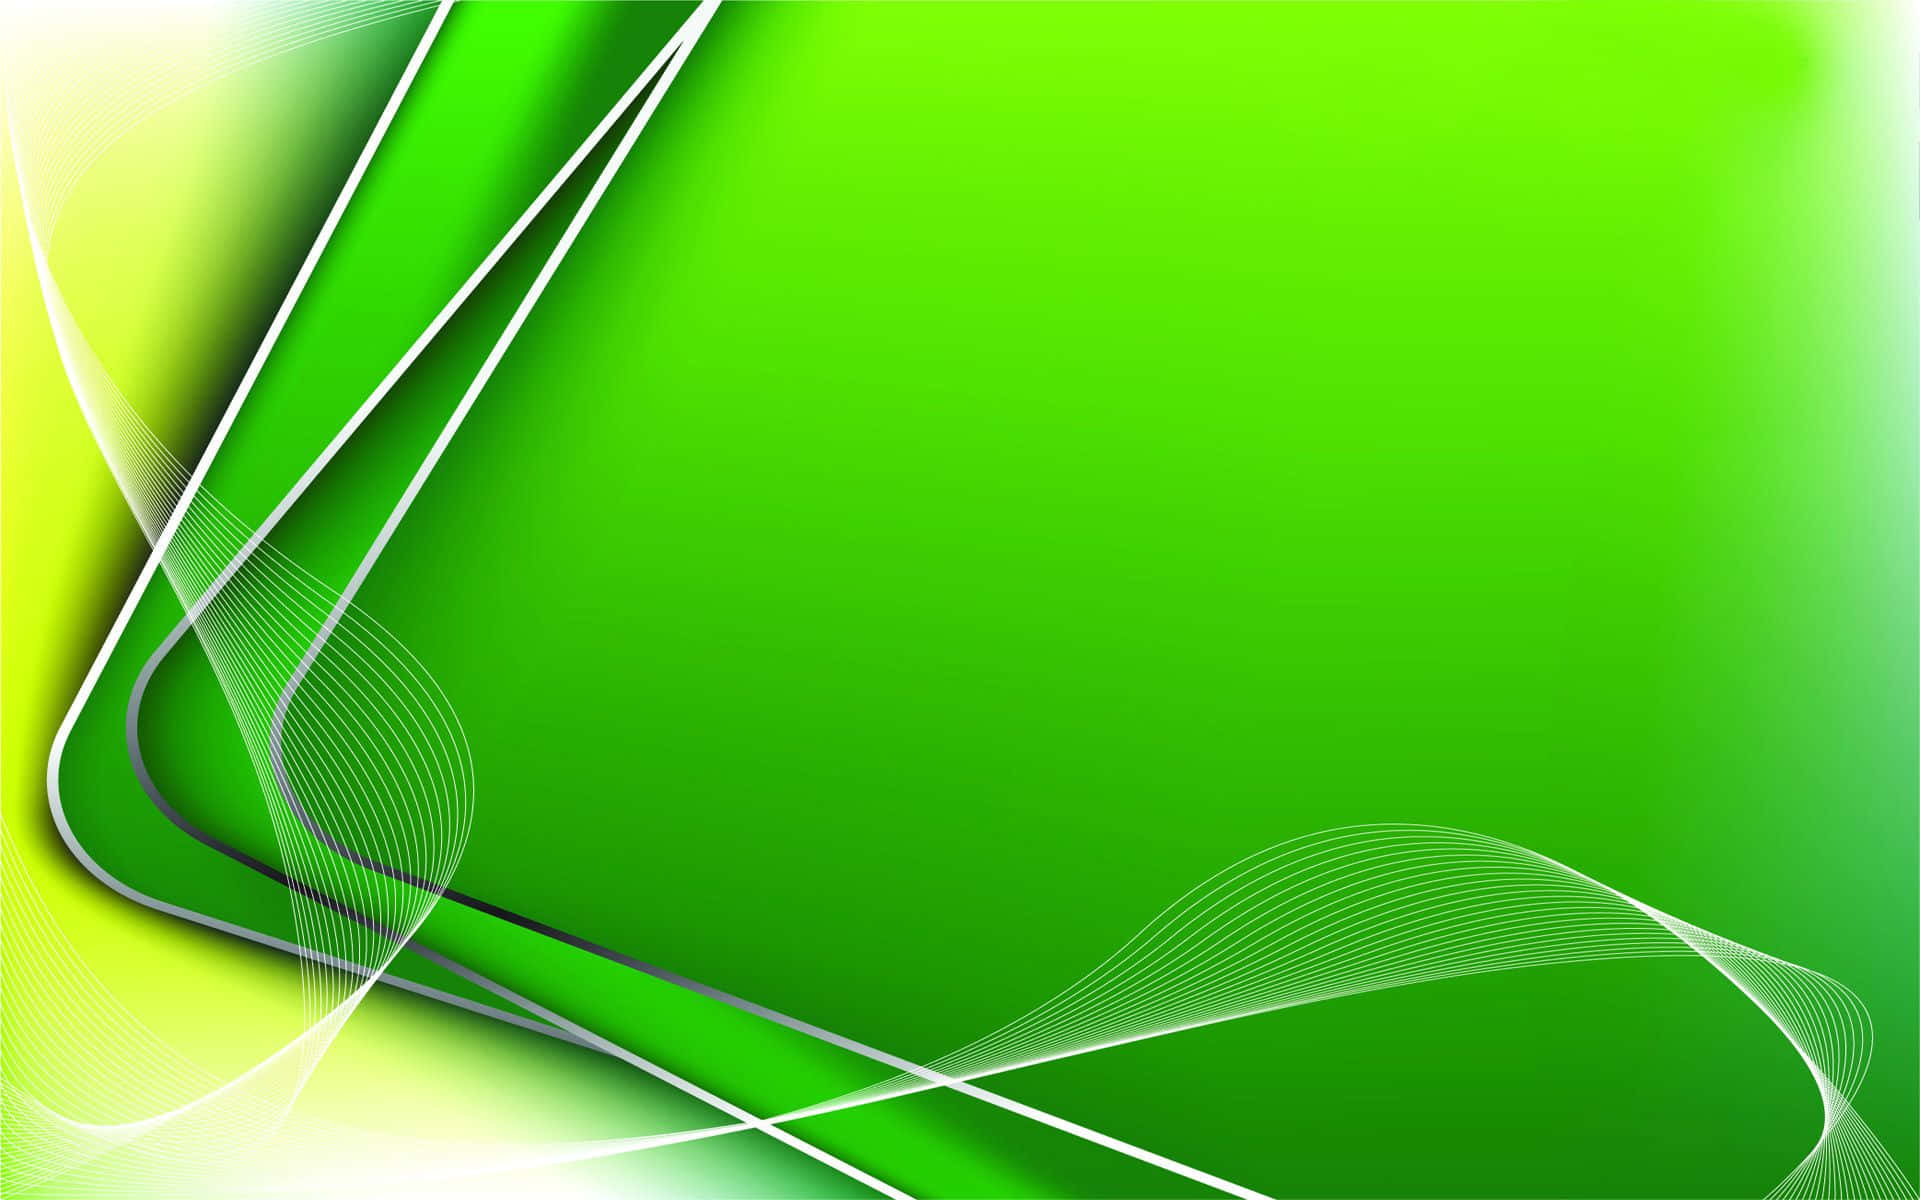 Vector illustration of a visually stunning green abstract background